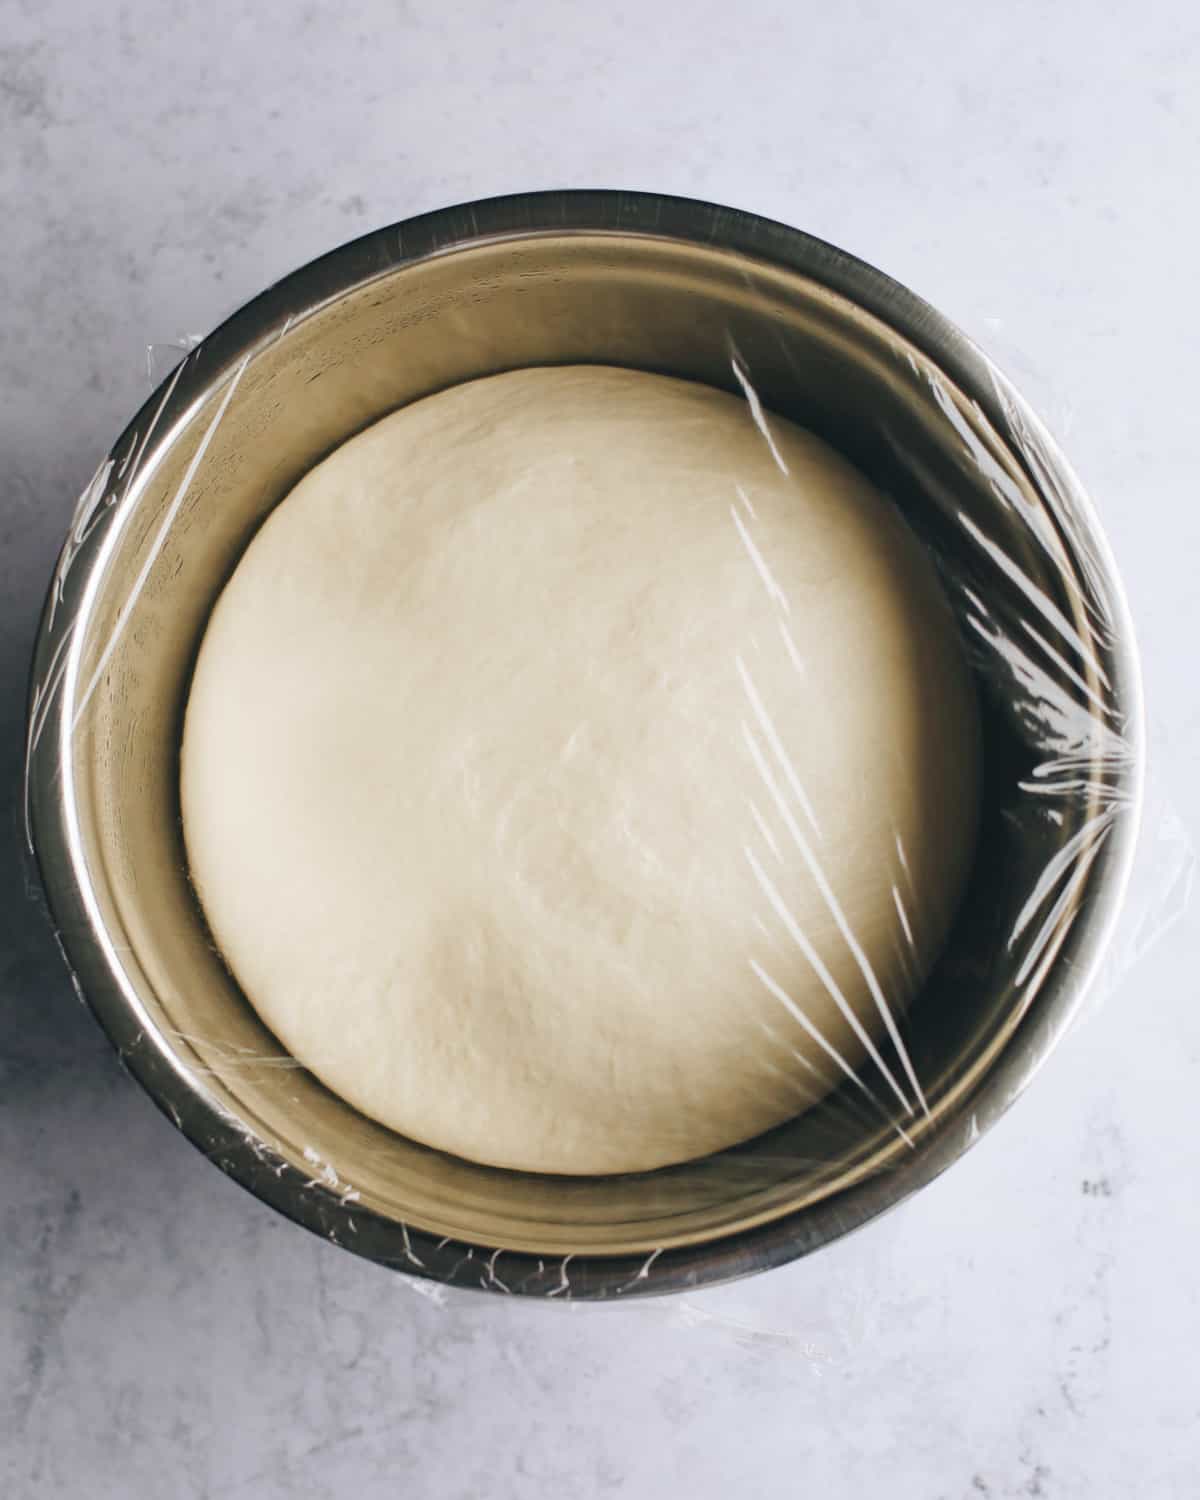 How to Make French Bread - dough after rising